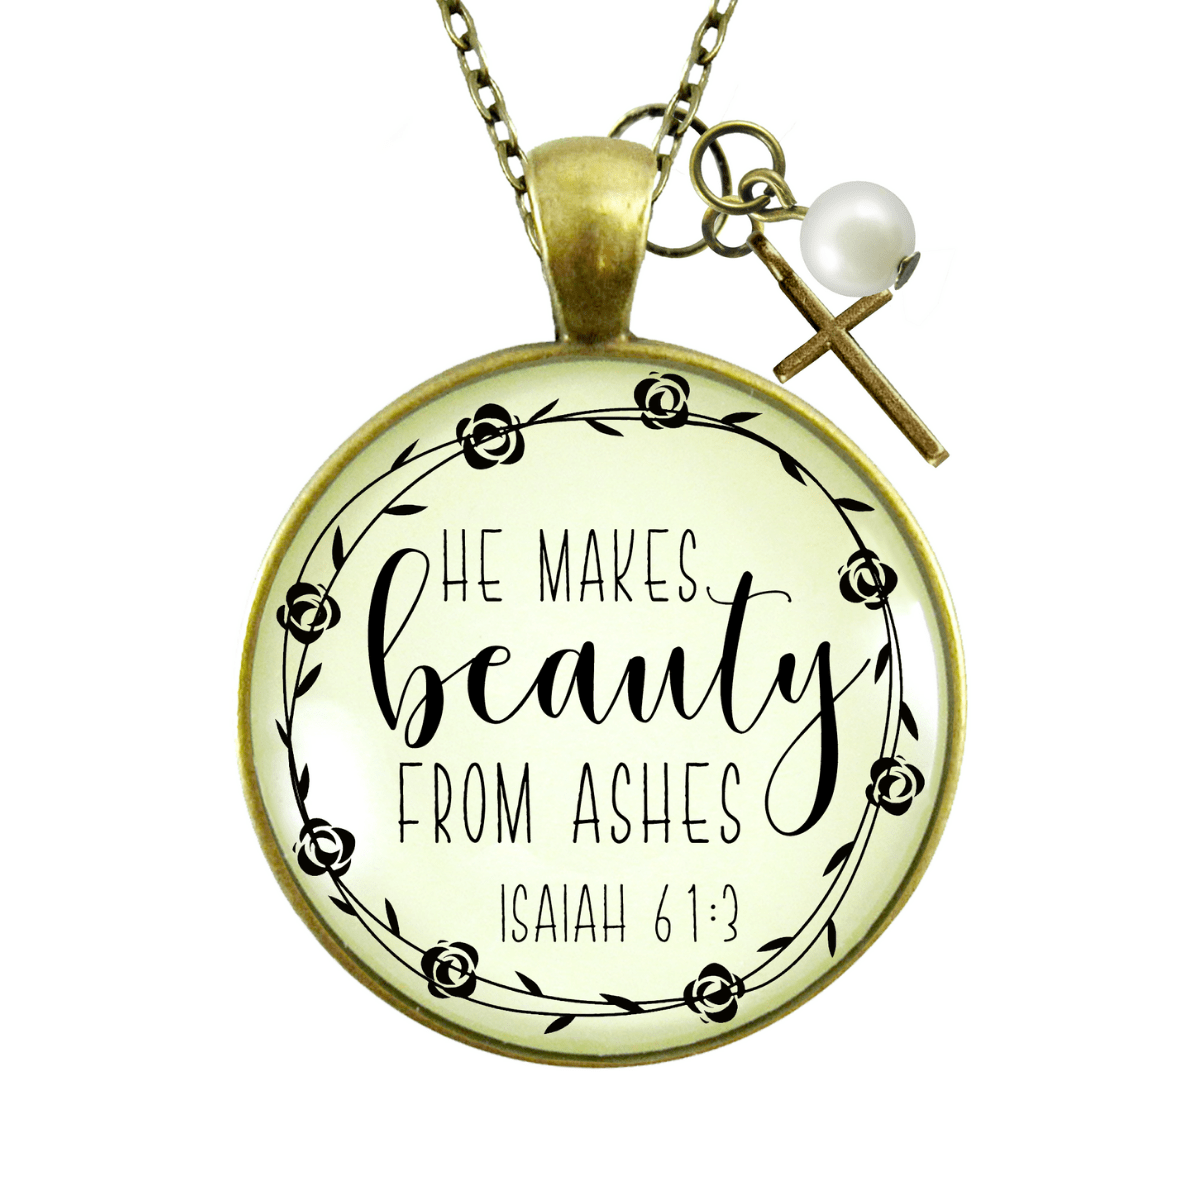 Gutsy Goodness Beauty from Ashes Necklace Faith Cross Charm Encourage Jewelry - Gutsy Goodness Handmade Jewelry;Beauty From Ashes Necklace Faith Cross Charm Encourage Jewelry - Gutsy Goodness Handmade Jewelry Gifts